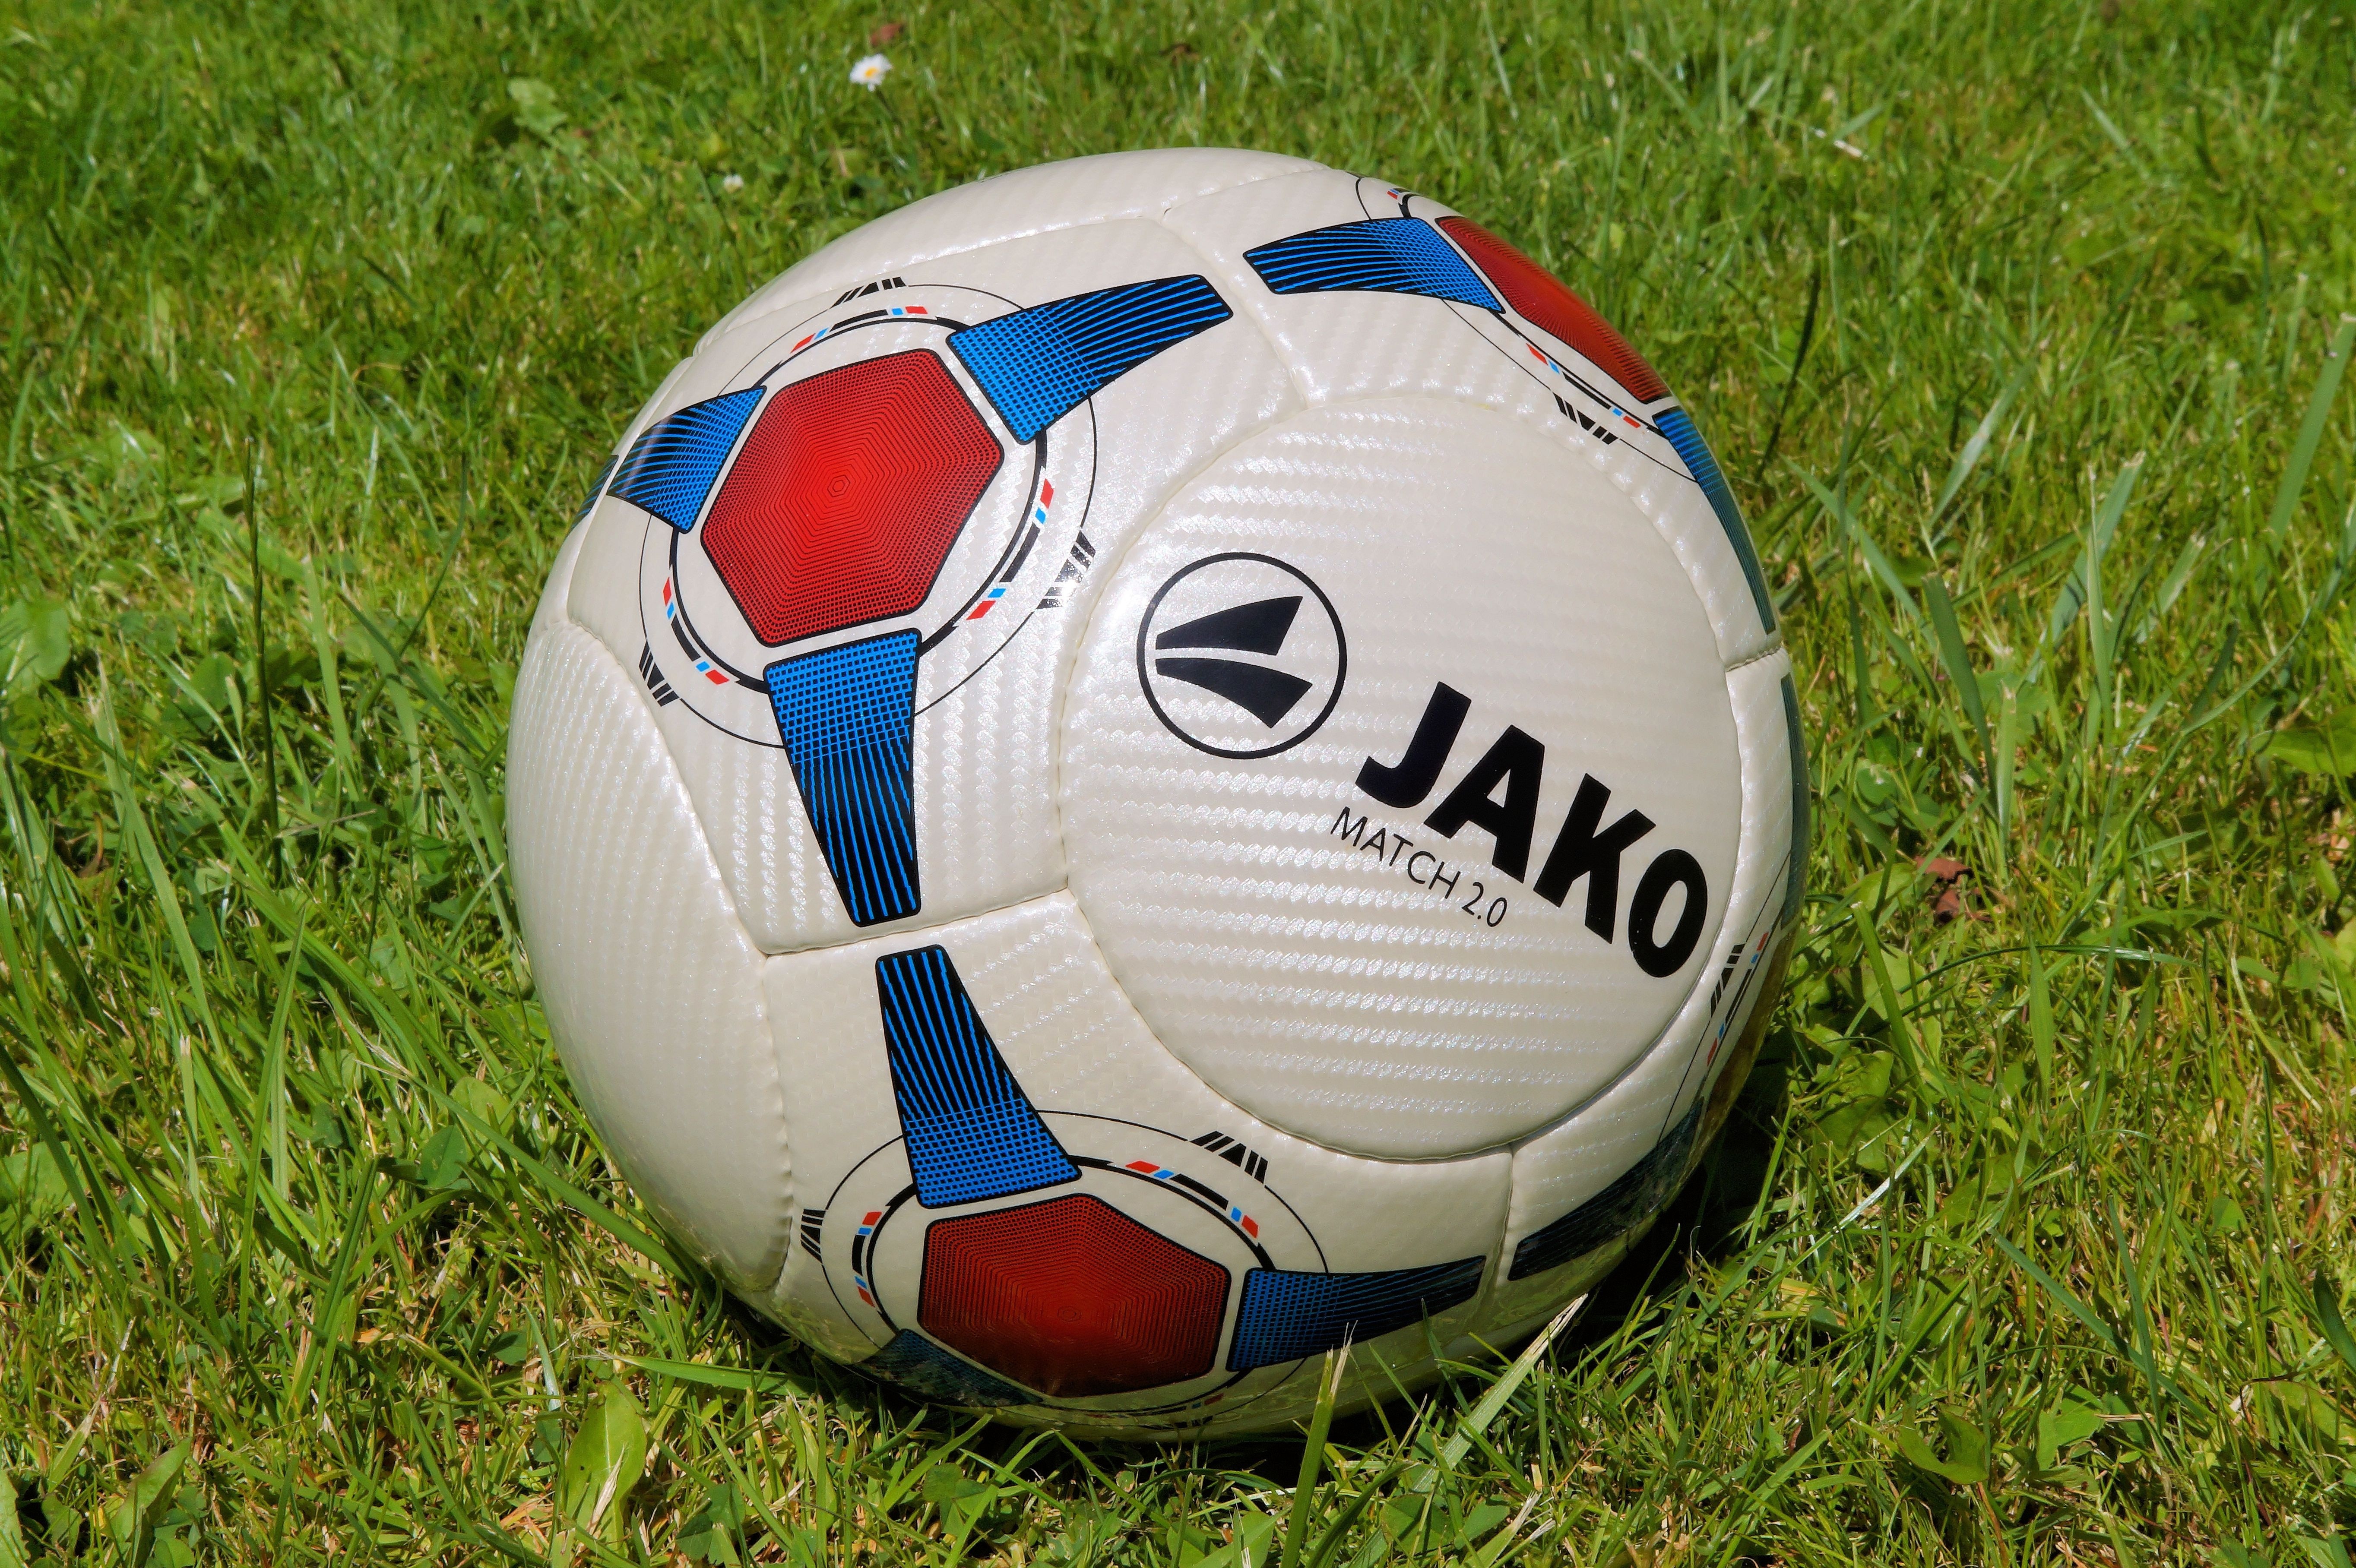 jako match 2.0 white blue and red soccer ball